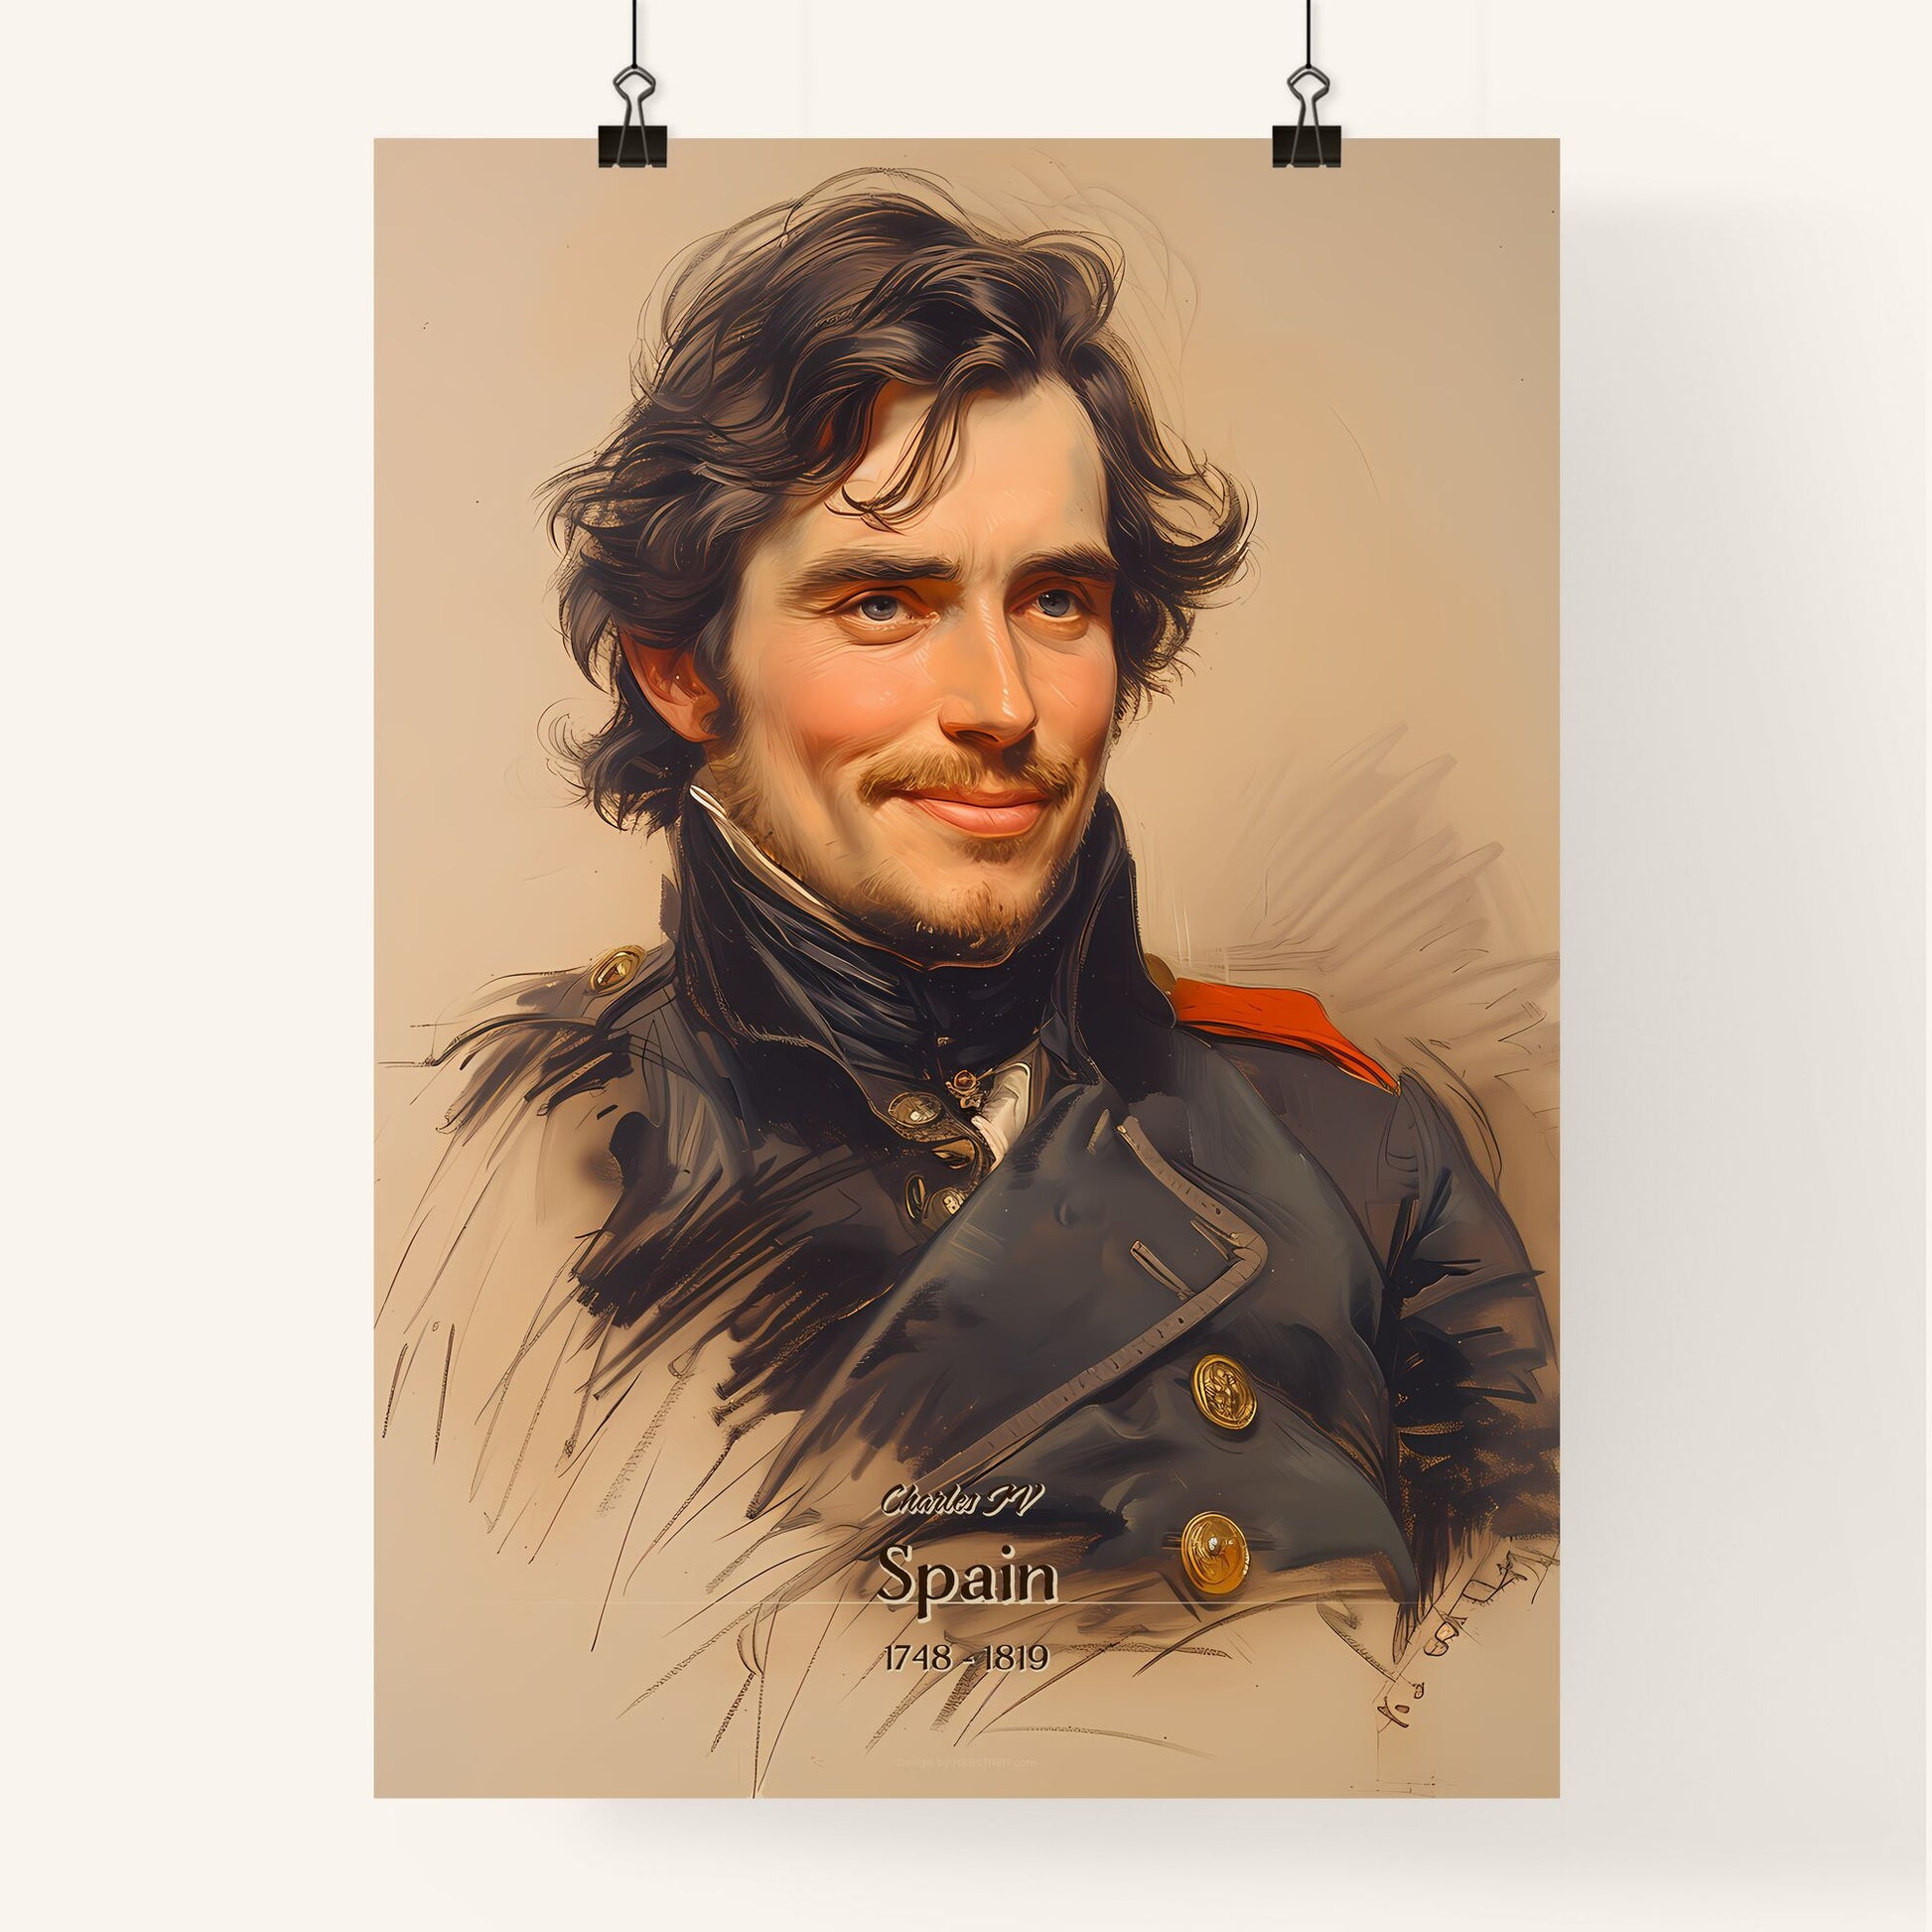 Charles IV, Spain, 1748 - 1819, A Poster of a man in a military uniform Default Title